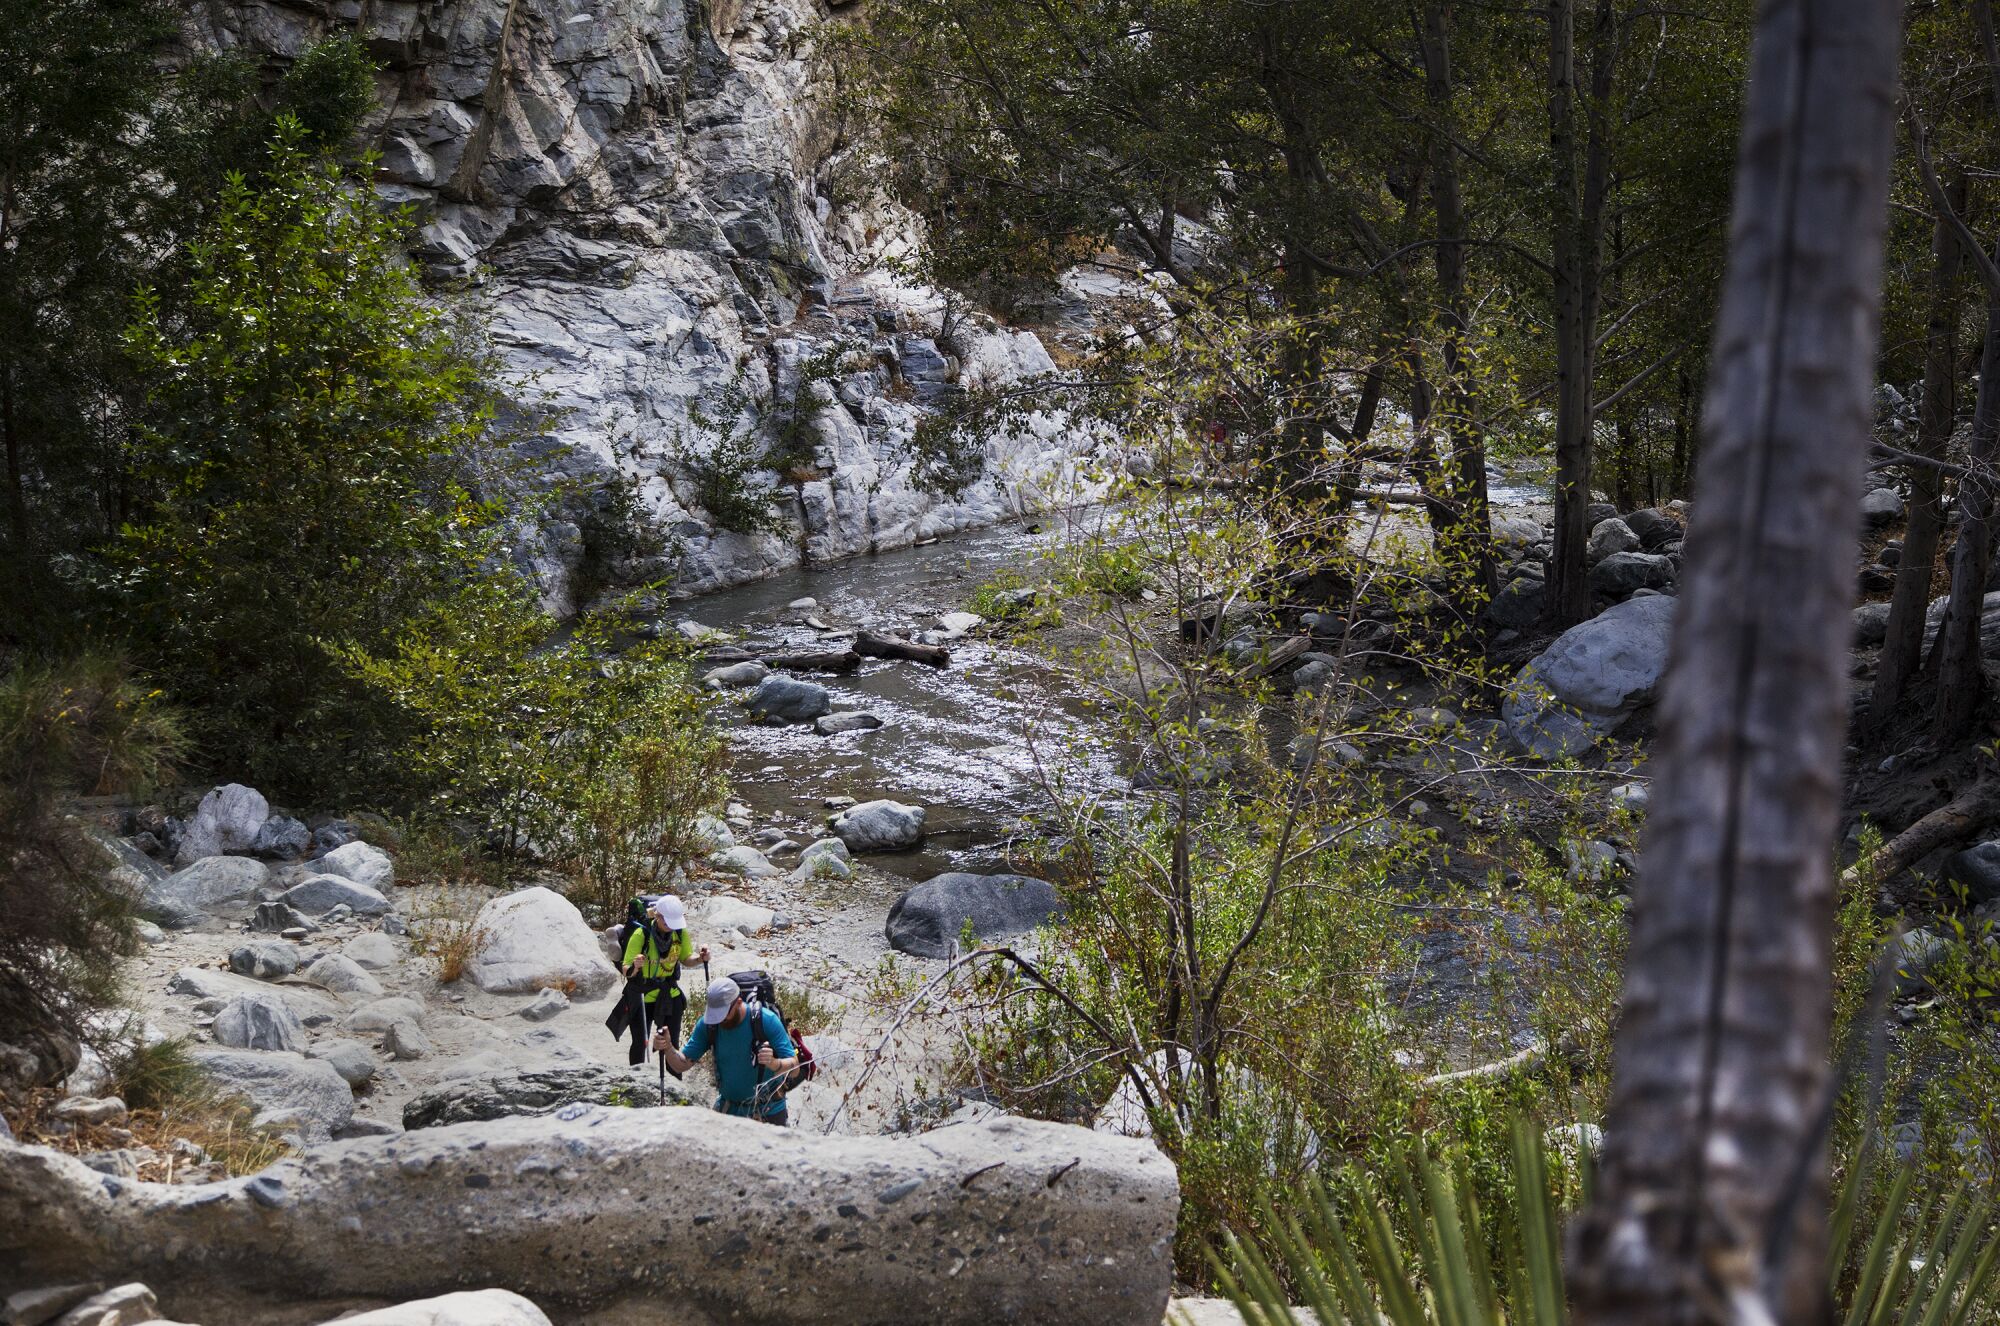 Hikers have to cross streams and the San Gabriel River amid rocky and rugged terrain.